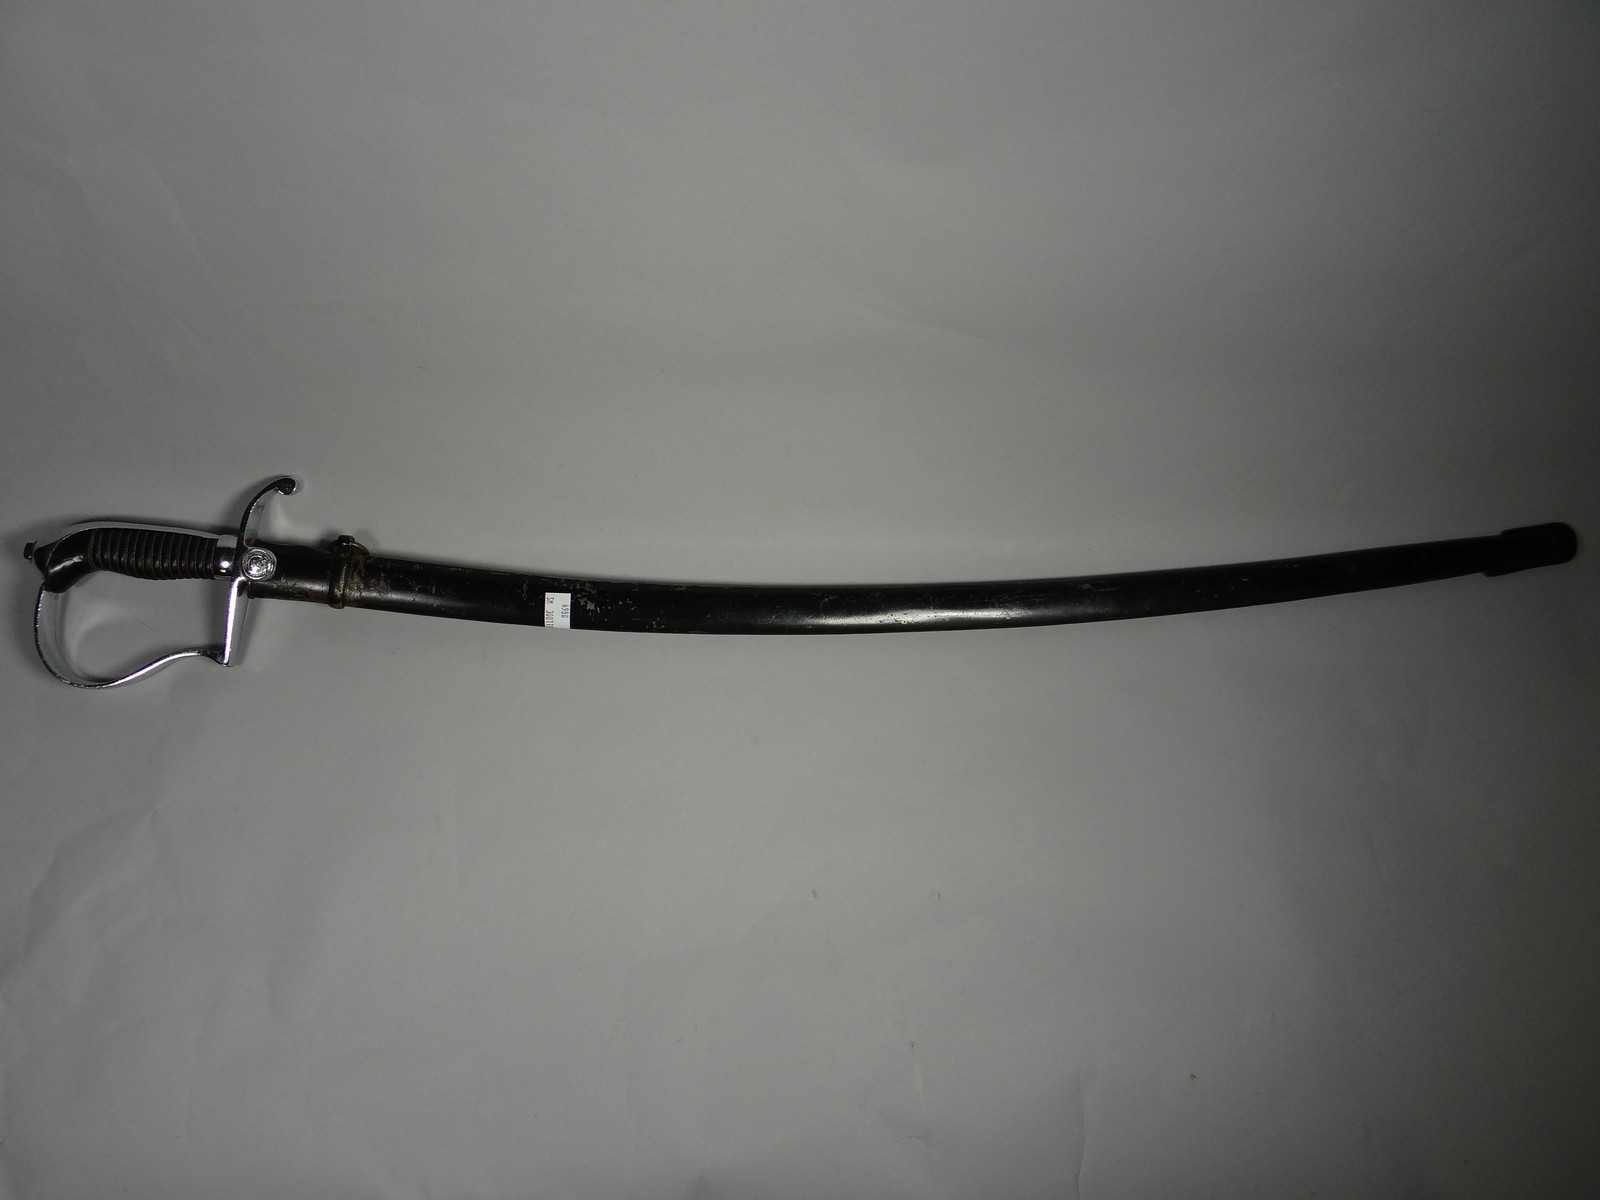 A German Democratic Republic sword with scabbard and insignia on crossguard